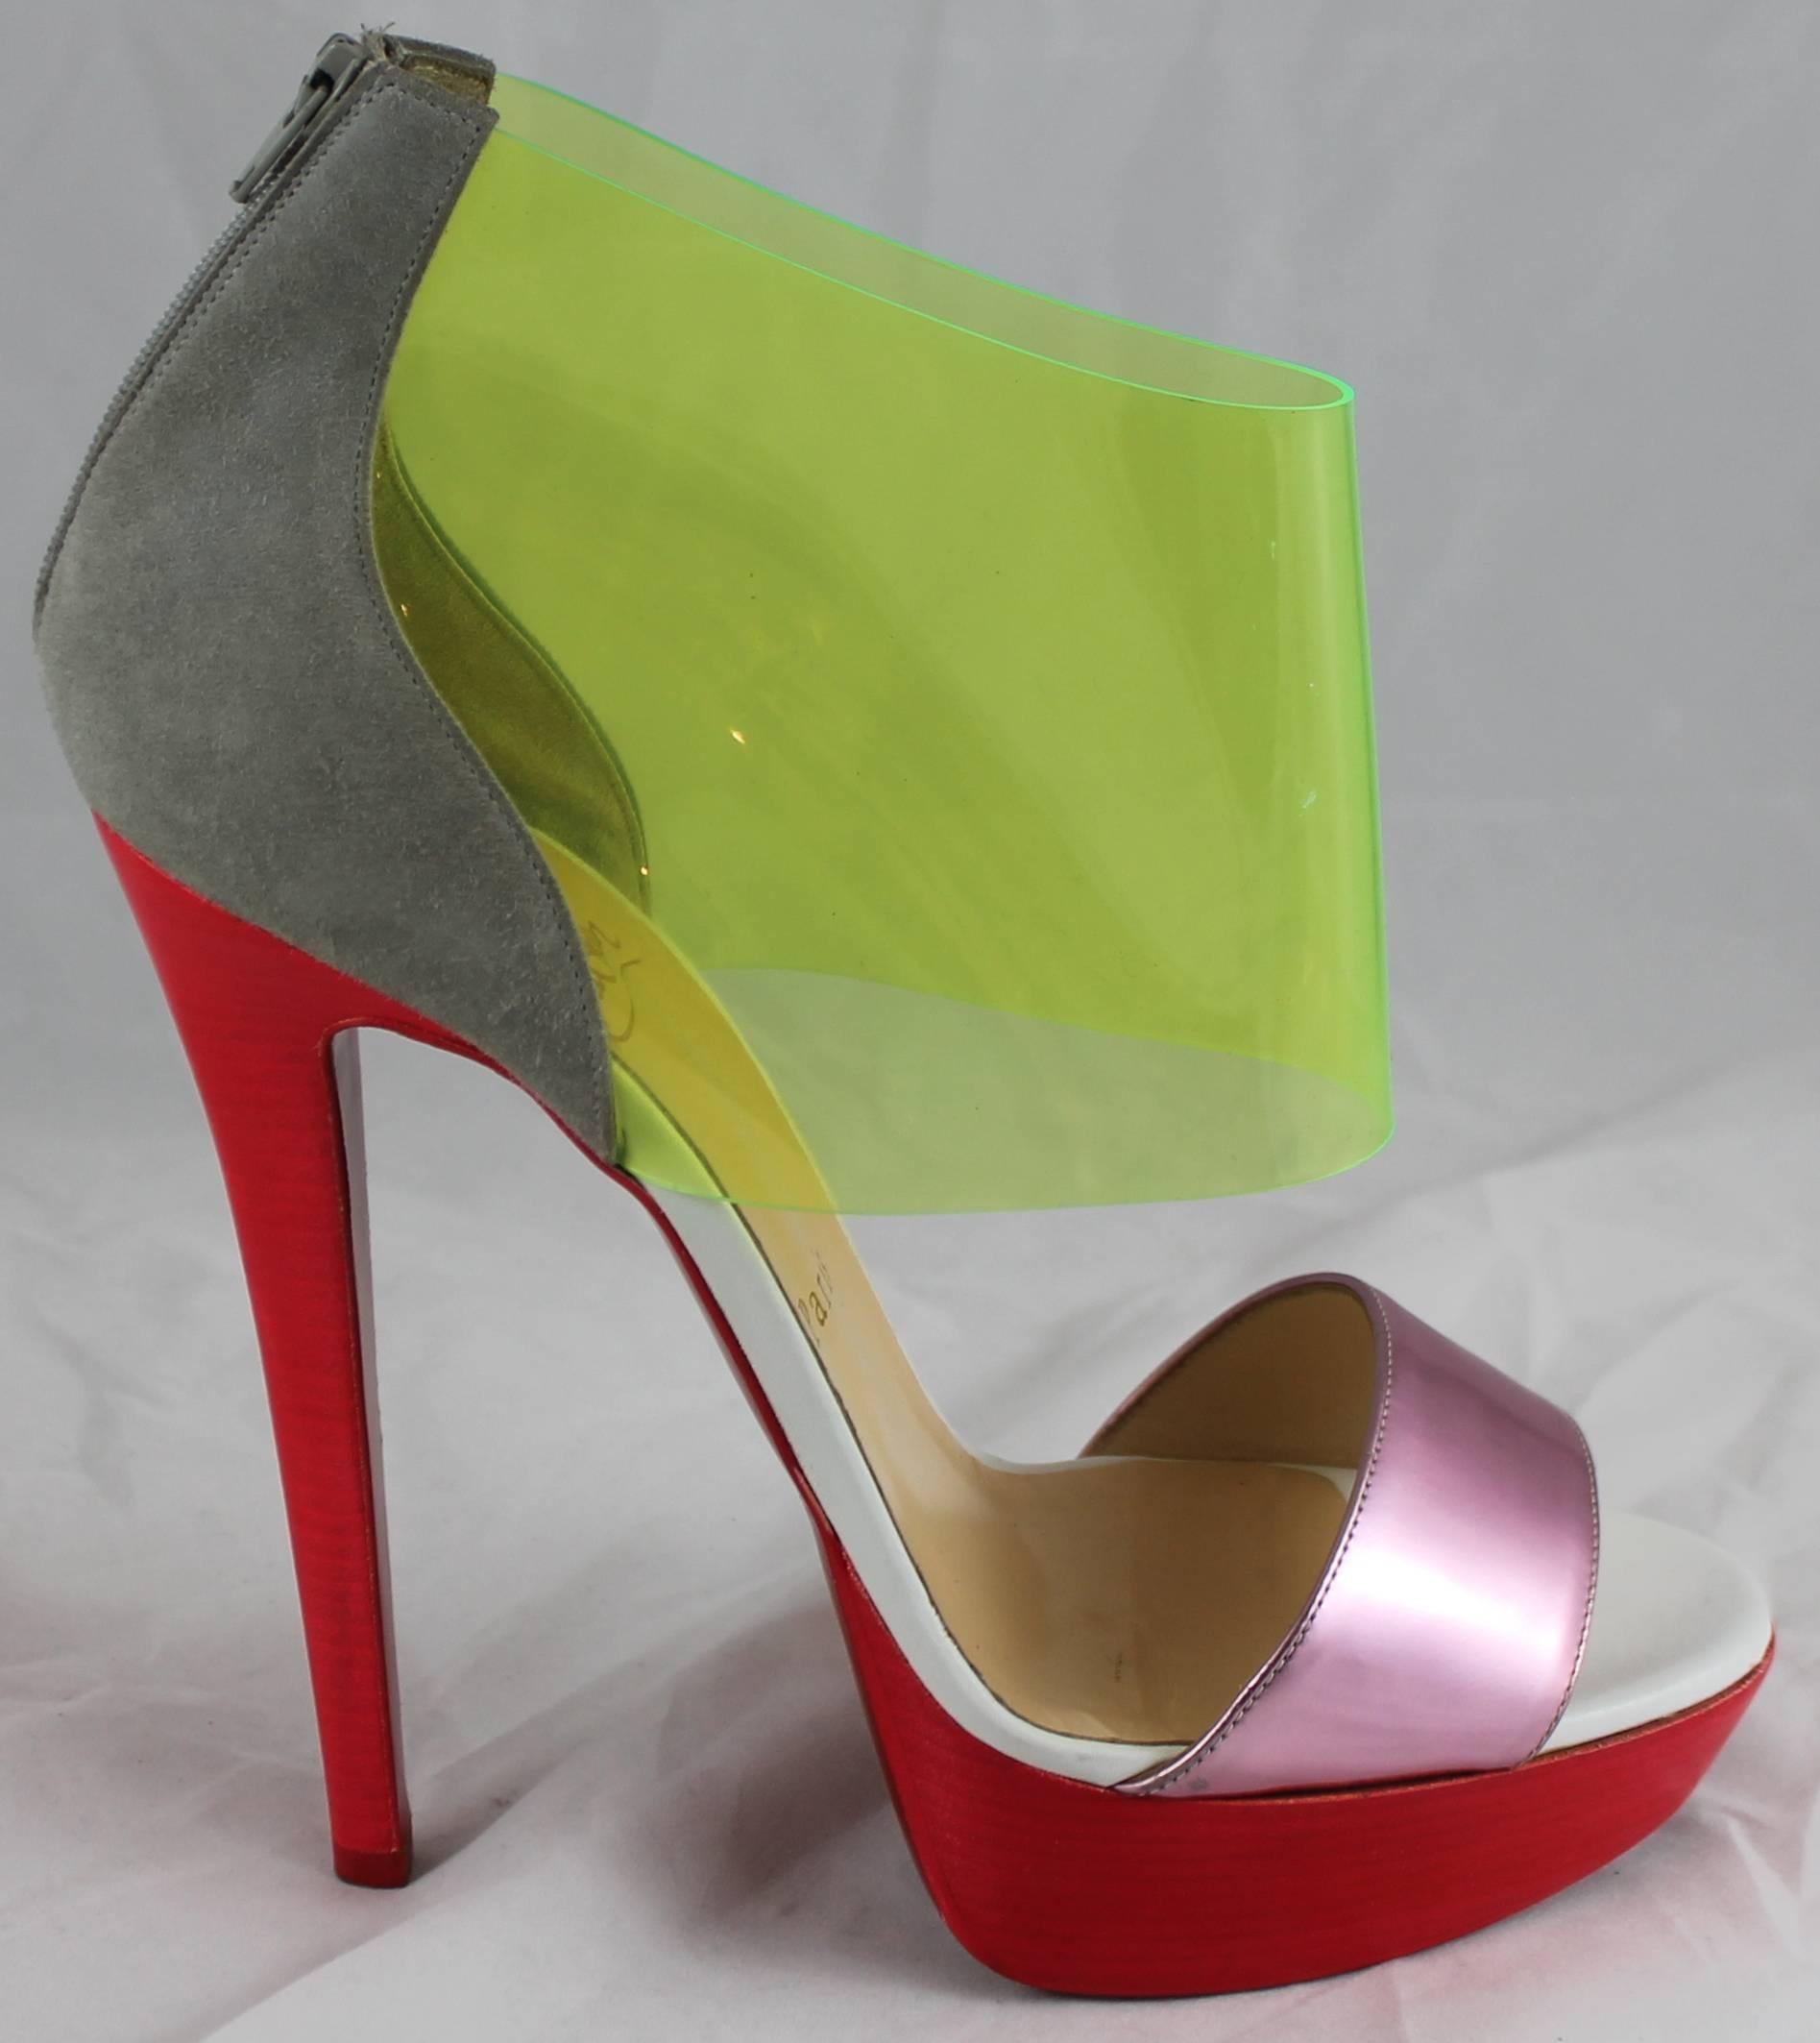 Christian Louboutin Multi Color Suede, Jelly & Leather Cutout Heels - 37.5. These shoes are in excellent condition with minor general wear and some minor wear specifically on the platform and heel as shown in the images. These unique shoes are a